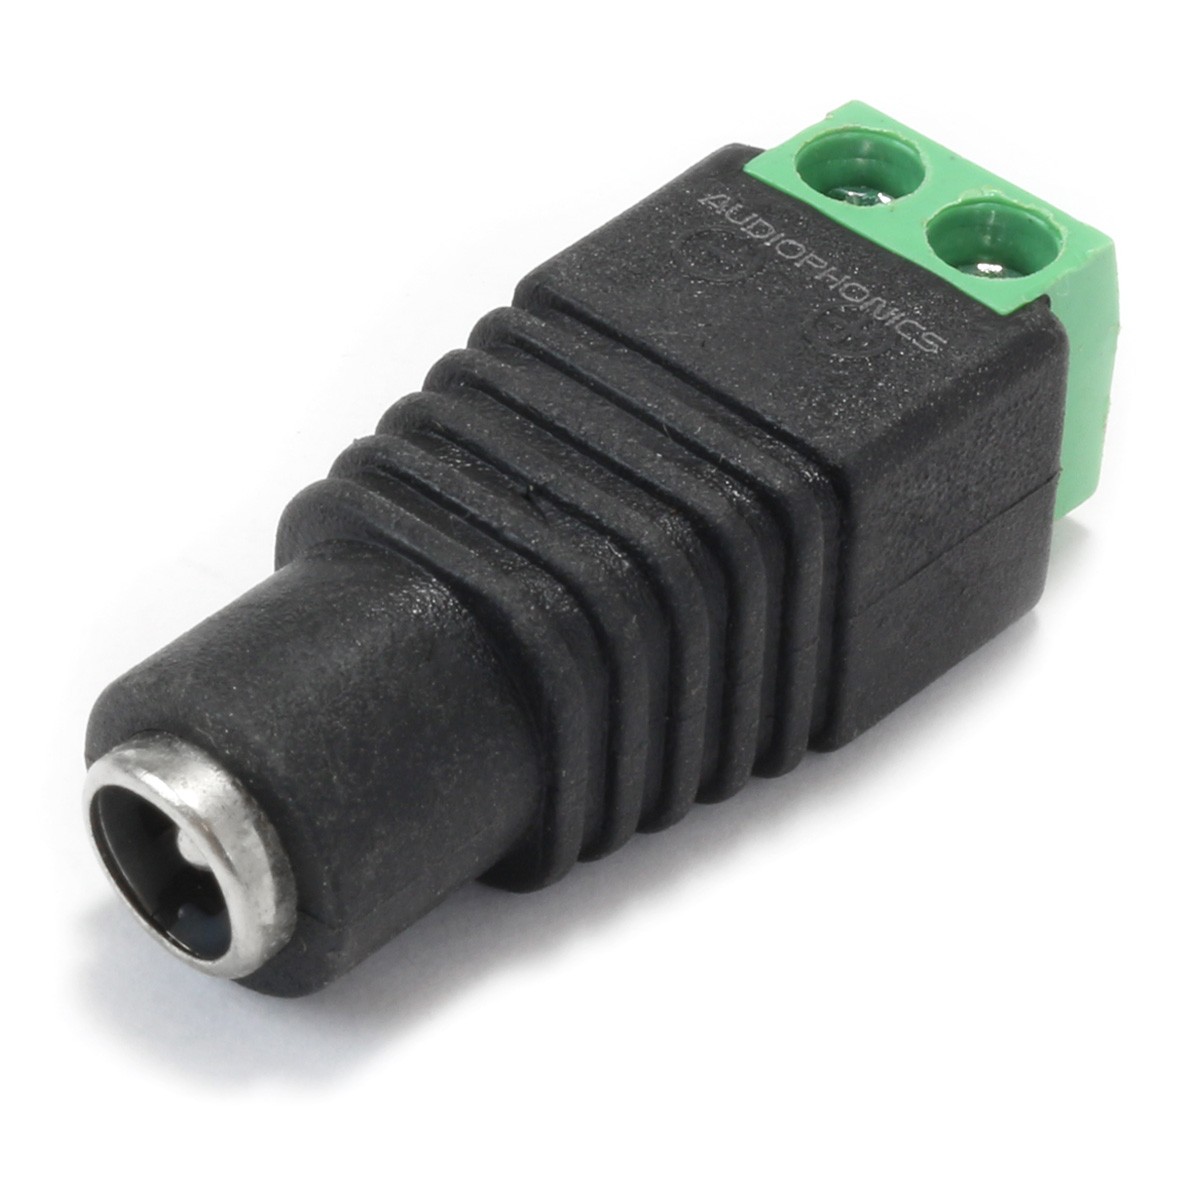 1 female 5.5/2.1mm barrel jack connector with screw terminals 